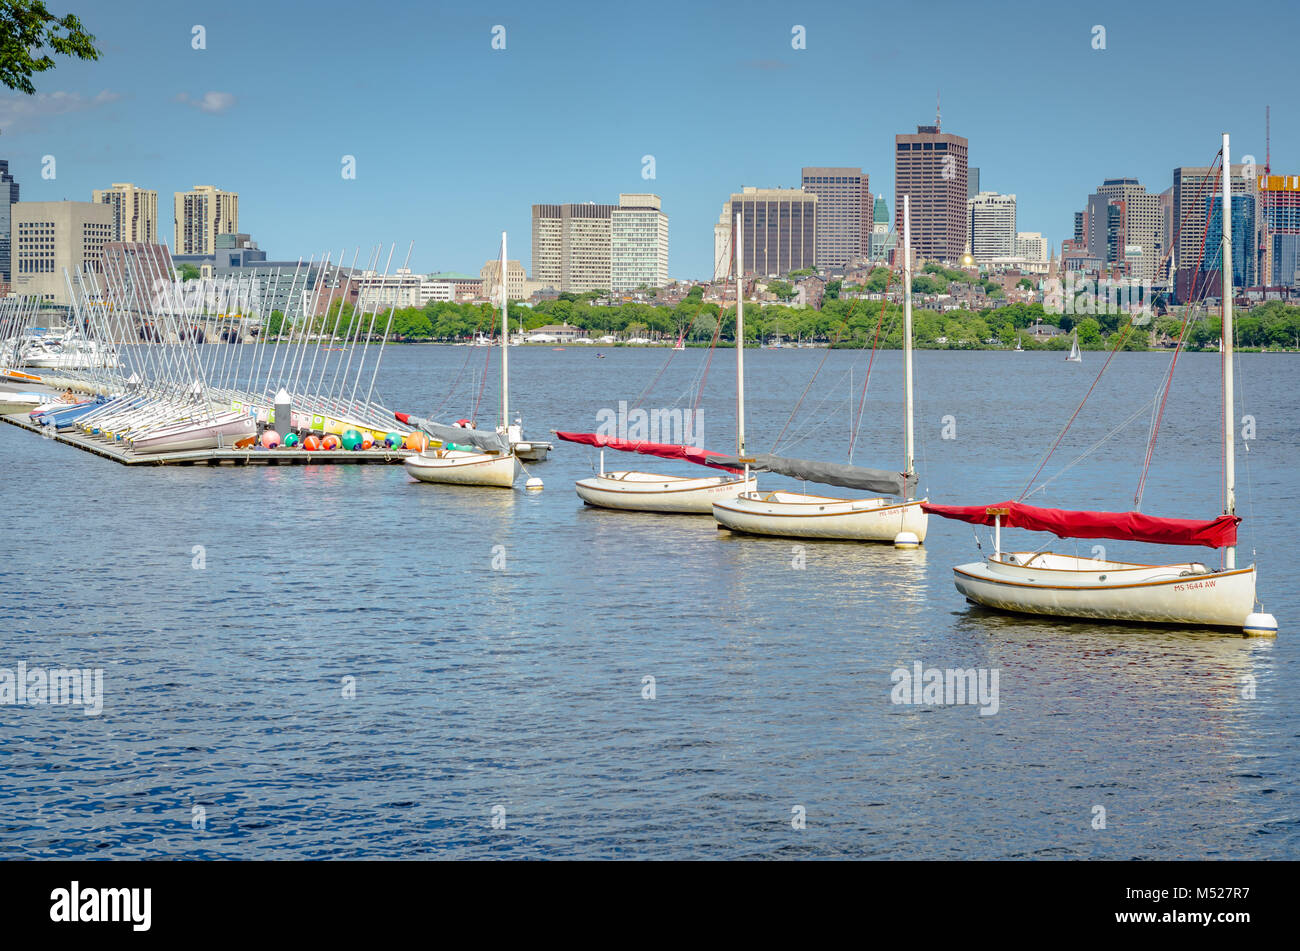 Since 1935, the MIT sailing pavilion has been where thousands in the Boston area have learned and perfected sailing and racing on the Charles River. Stock Photo